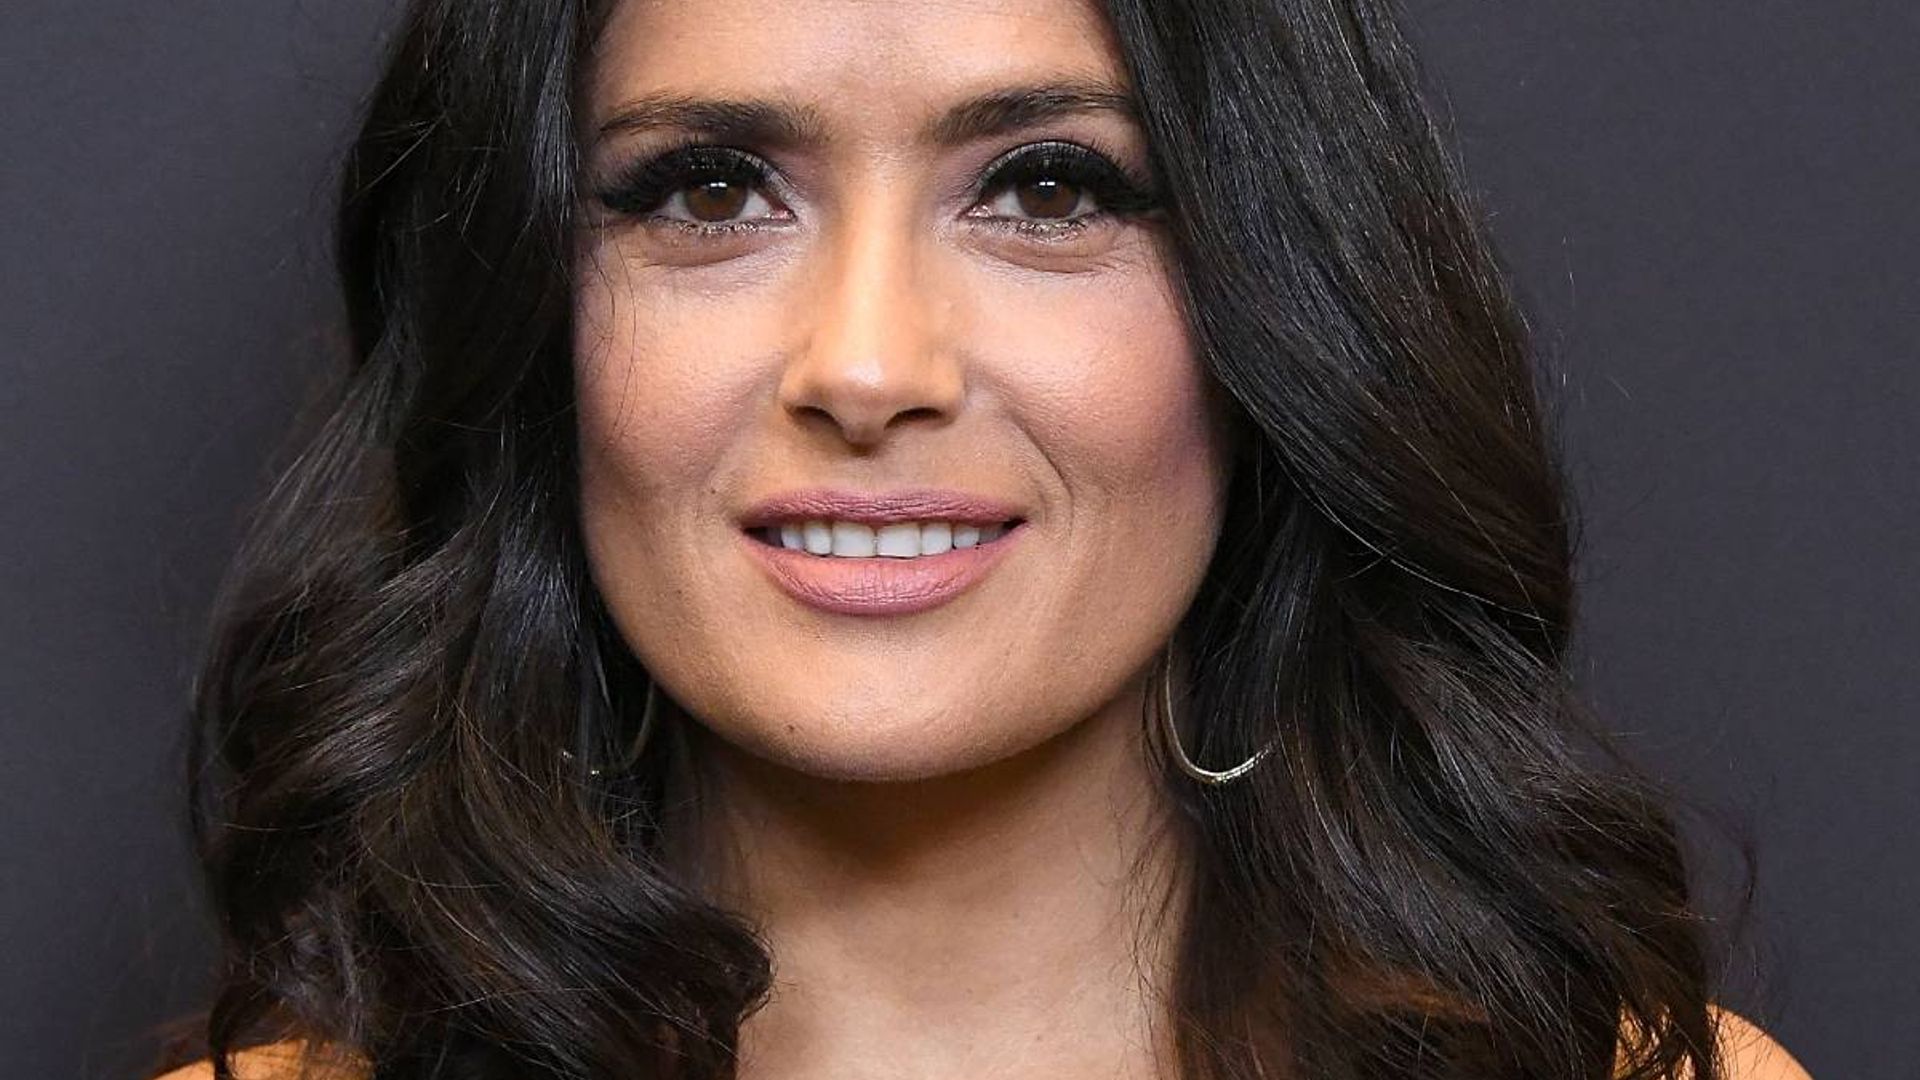 Salma Hayek transforms her appearance in latest photo as she announces exciting news